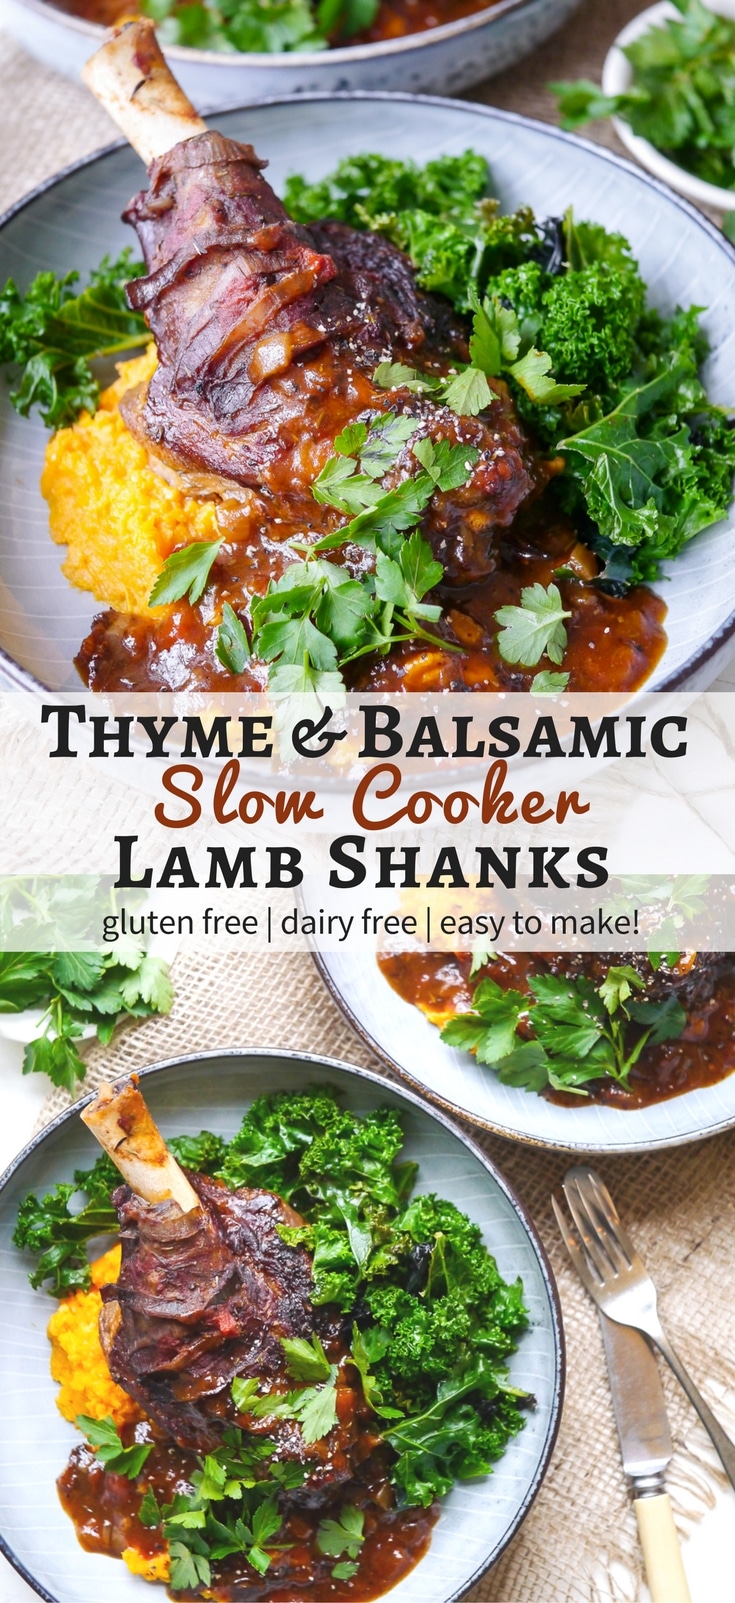 Thyme and Balsamic Slow Cooker Lamb Shanks | Nourish Every Day